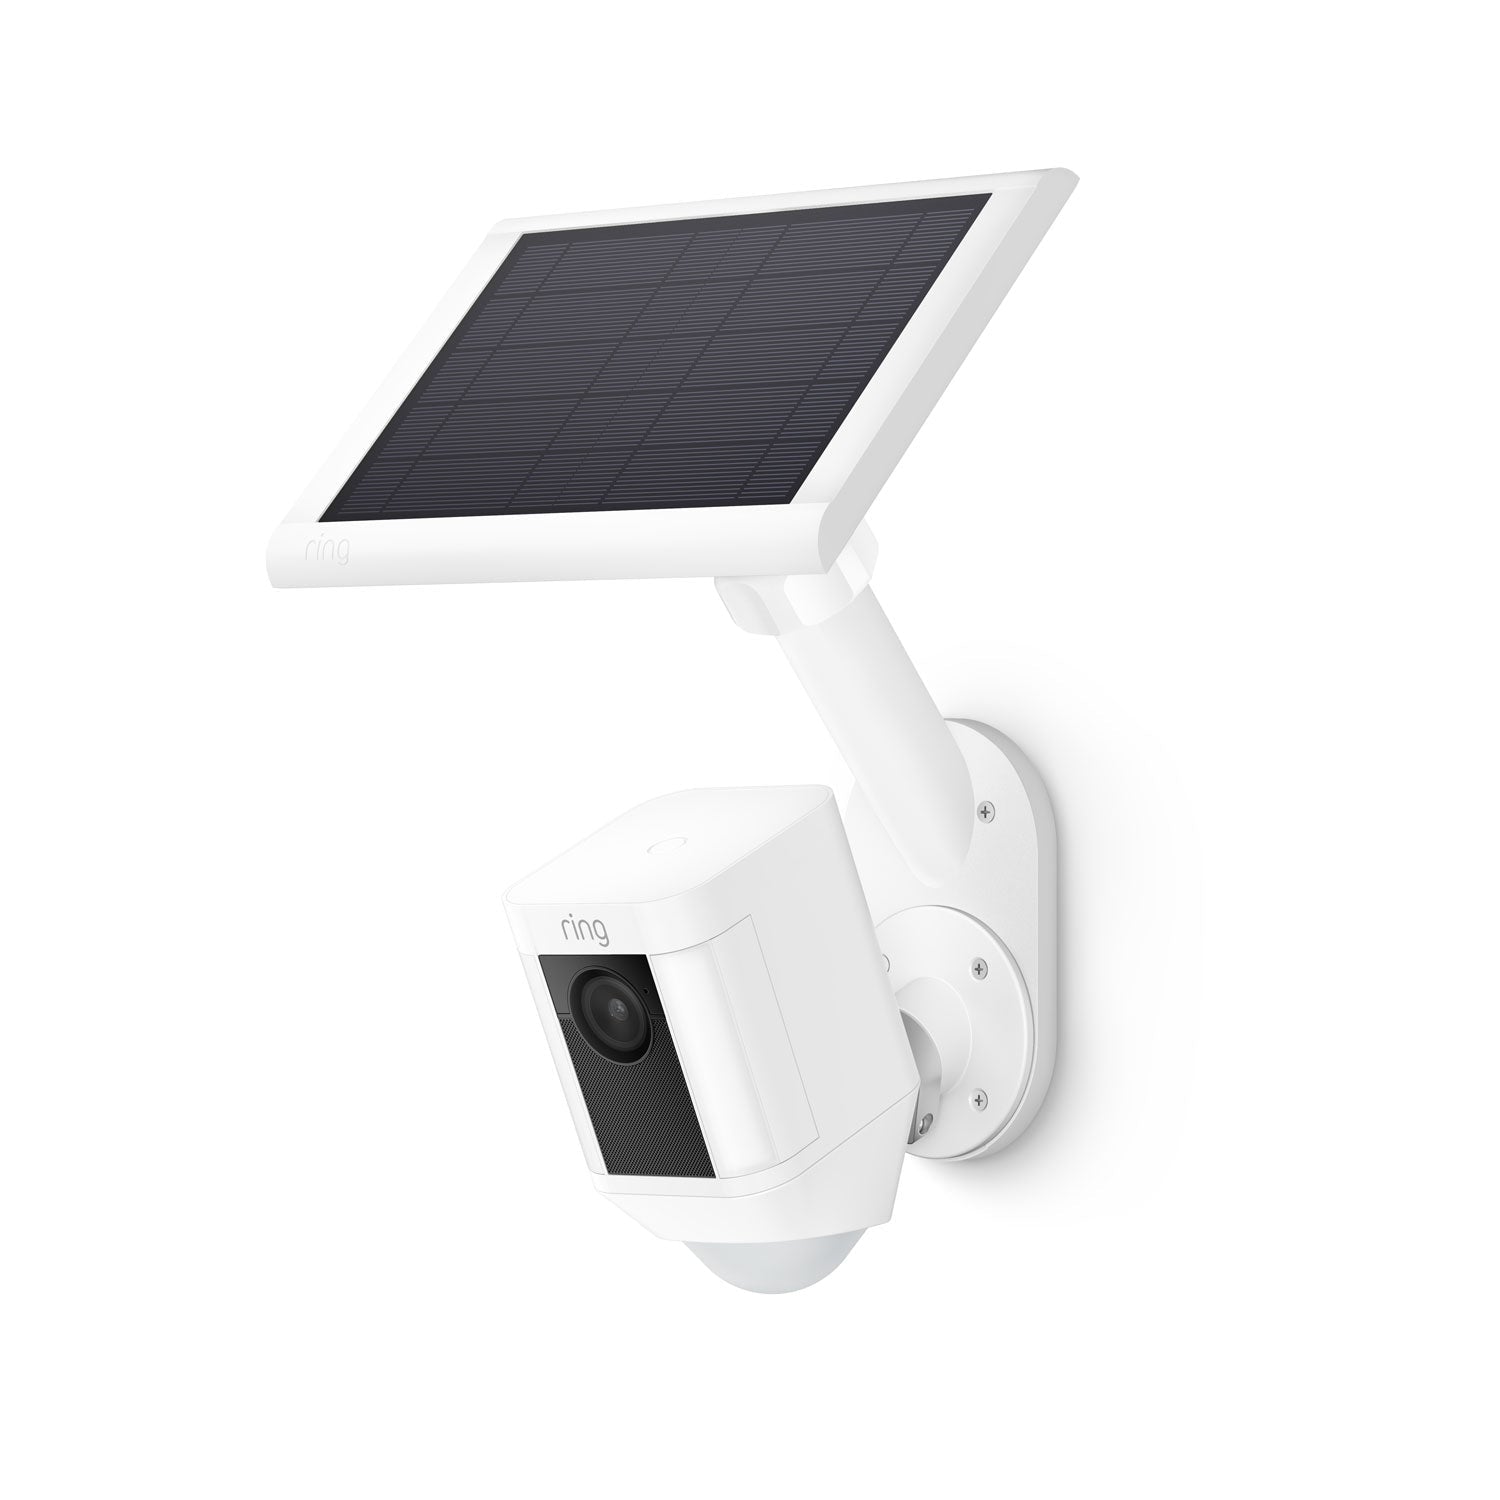 Wall Mount for Solar Panels and Cams - White:Wall Mount for Solar Panels and Cams